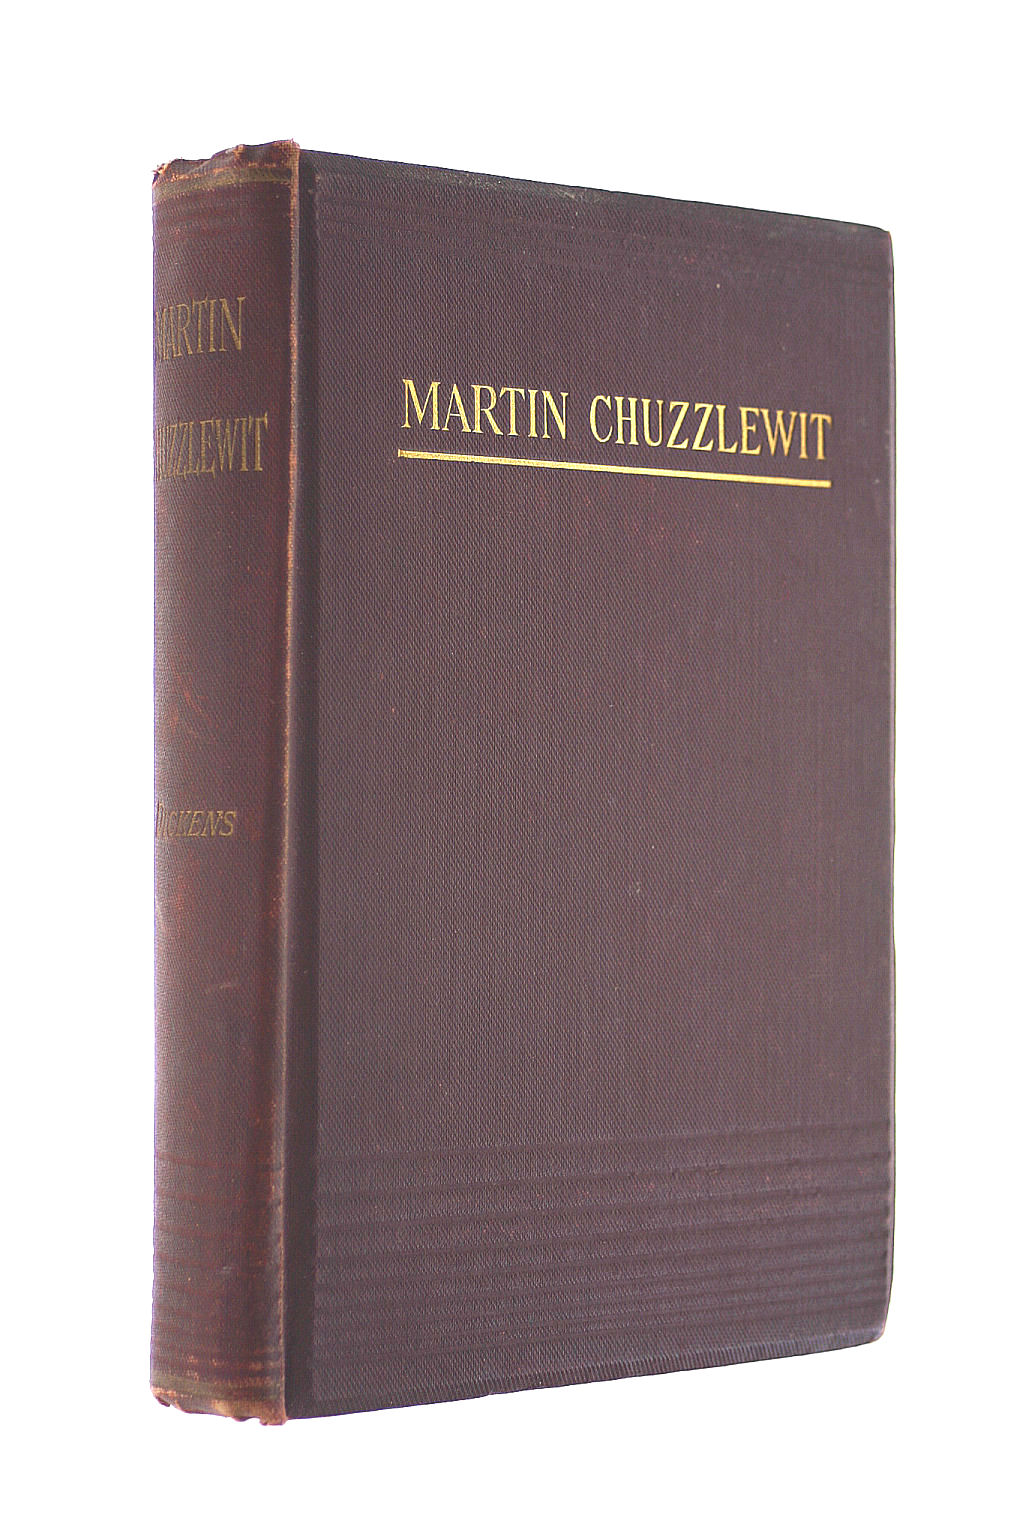 CHARLES DICKENS - The Life and Adventures of Martin Chuzzlewit